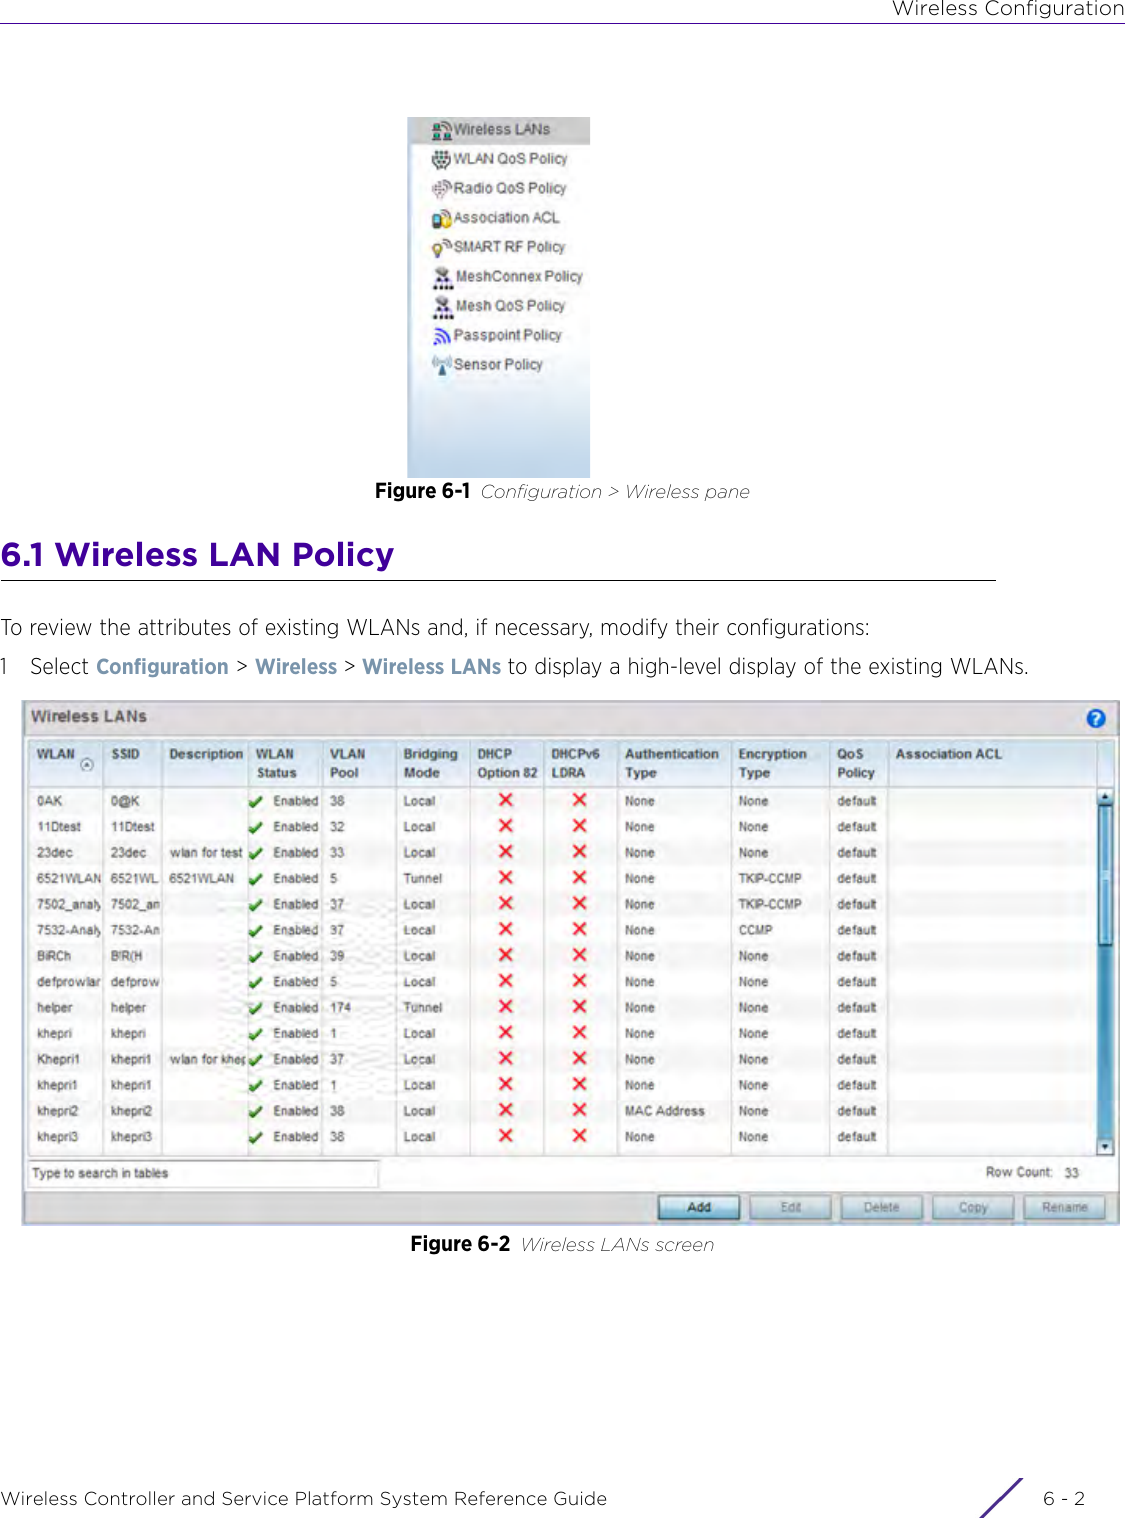 Wireless ConfigurationWireless Controller and Service Platform System Reference Guide  6 - 2Figure 6-1 Configuration &gt; Wireless pane6.1 Wireless LAN PolicyTo review the attributes of existing WLANs and, if necessary, modify their configurations:1Select Configuration &gt; Wireless &gt; Wireless LANs to display a high-level display of the existing WLANs.Figure 6-2 Wireless LANs screen